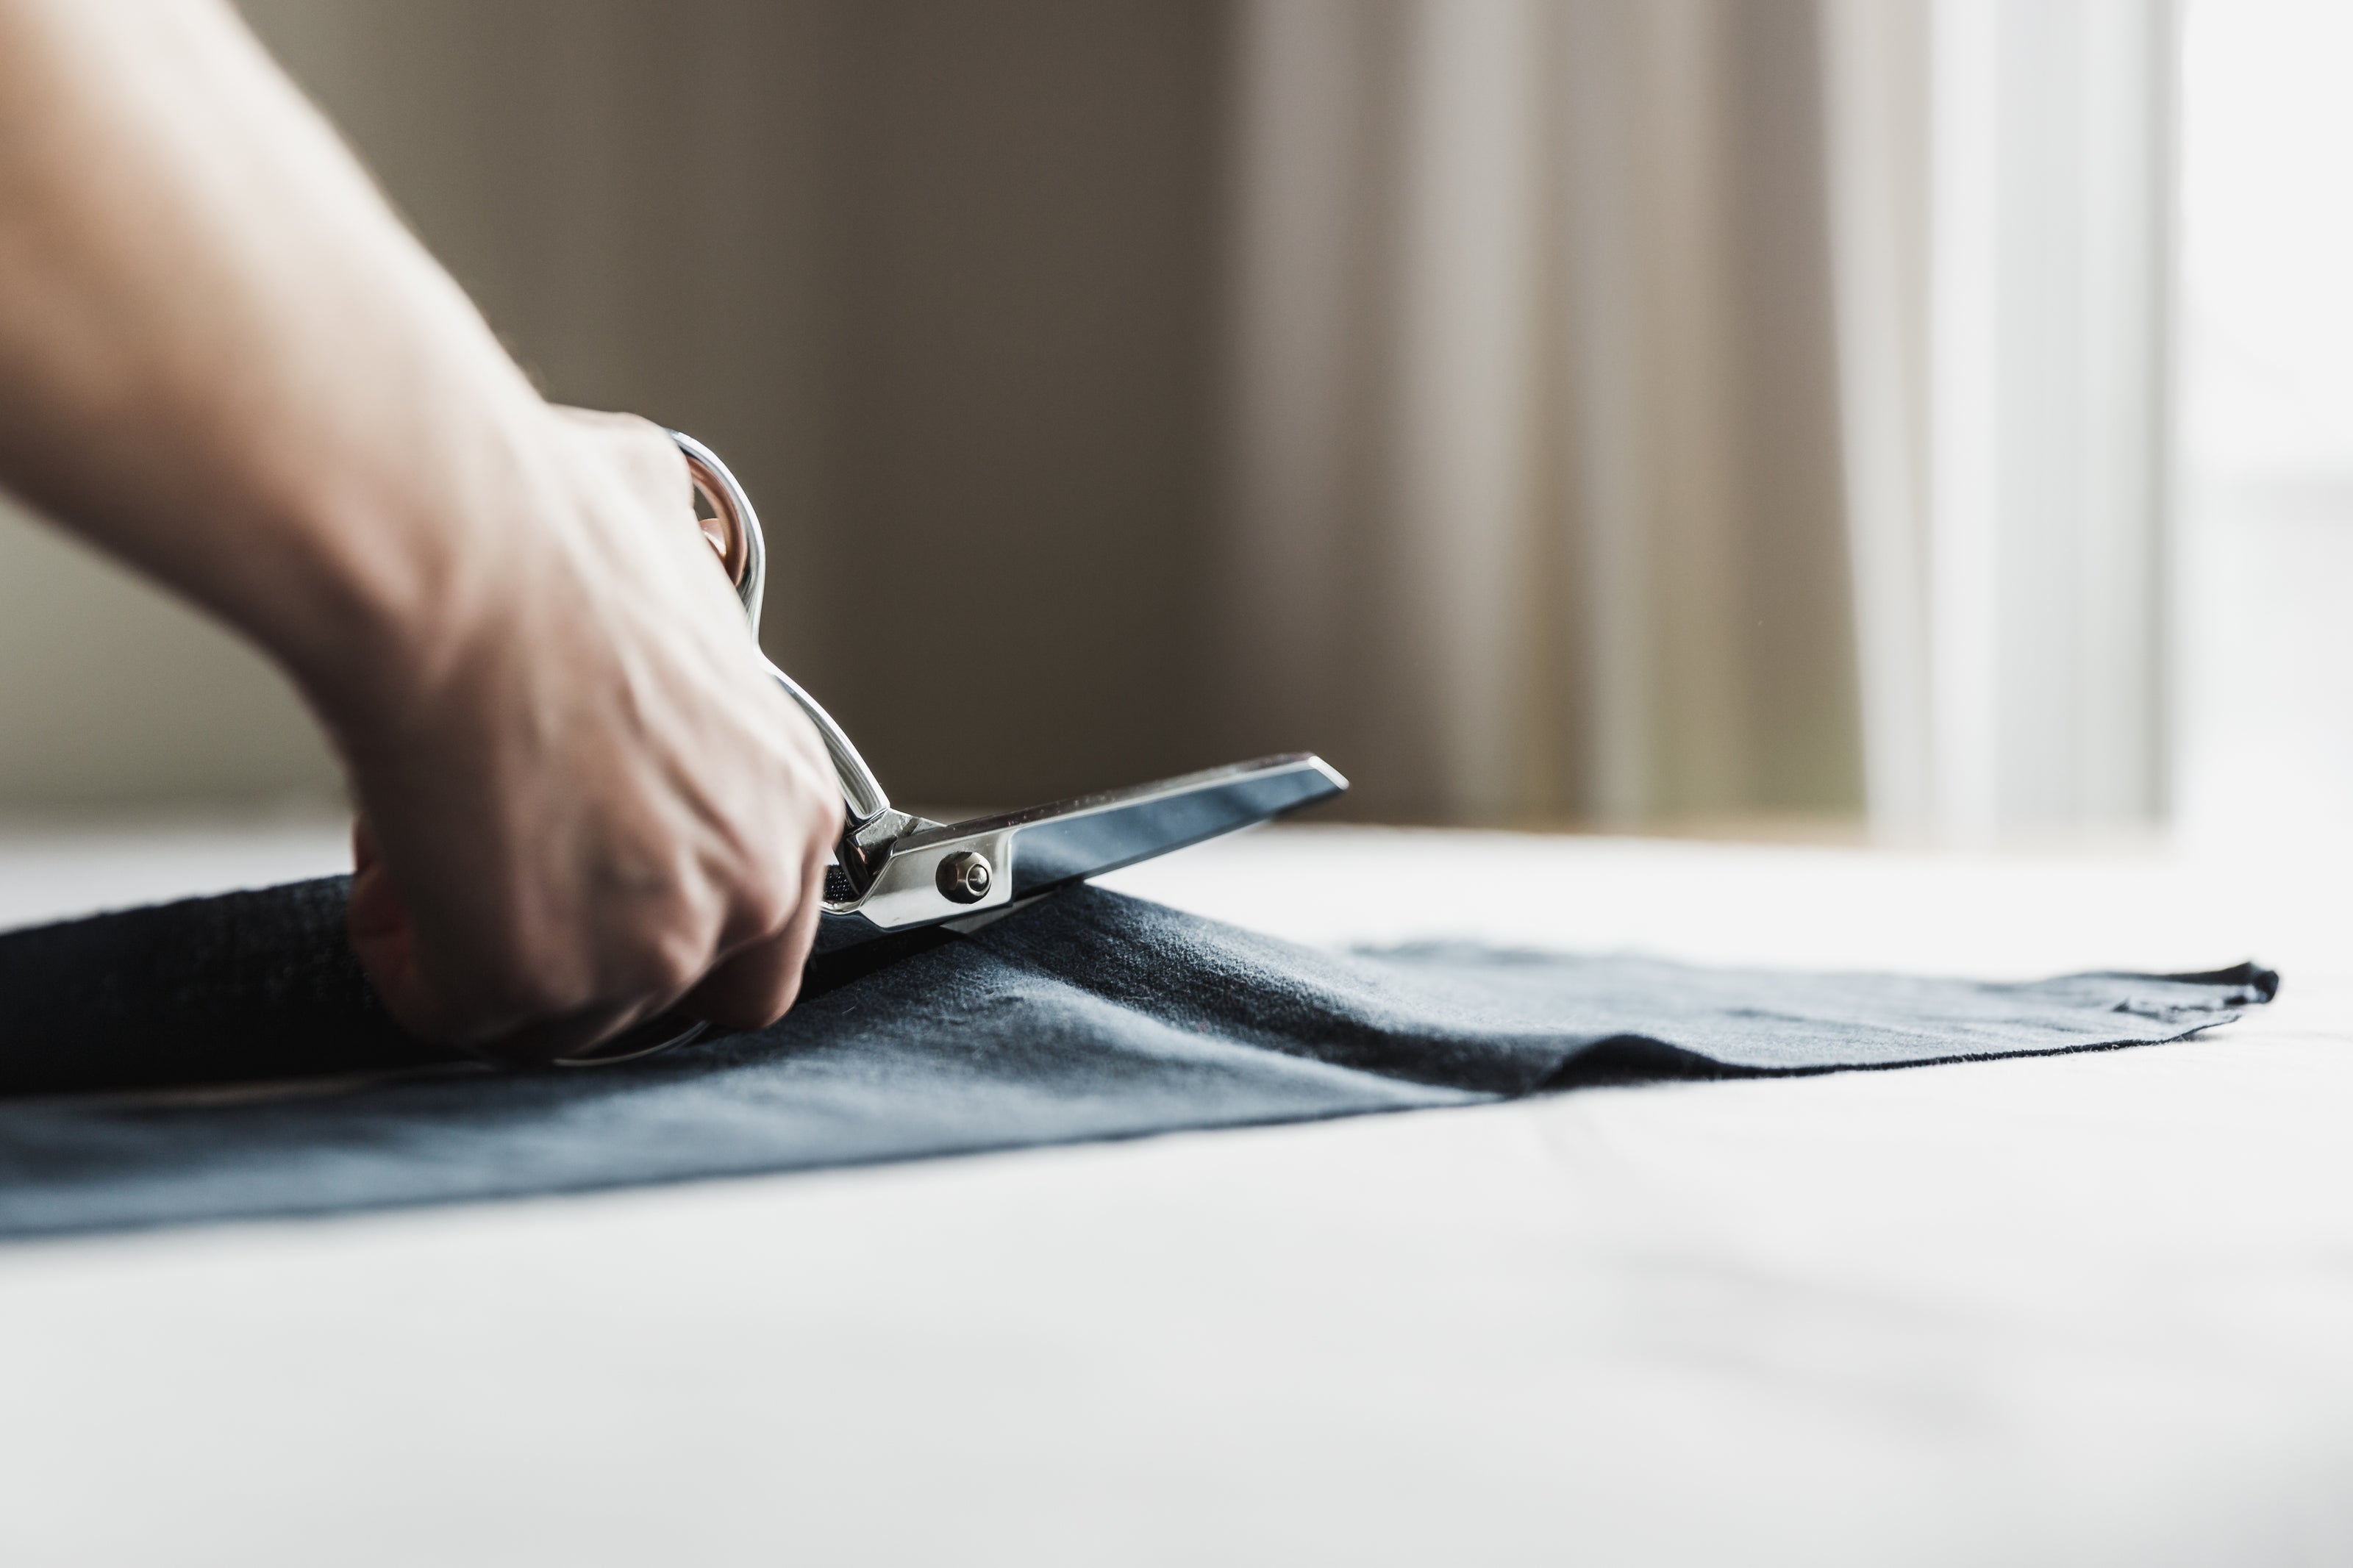 Close up of person cutting fabric with scissors